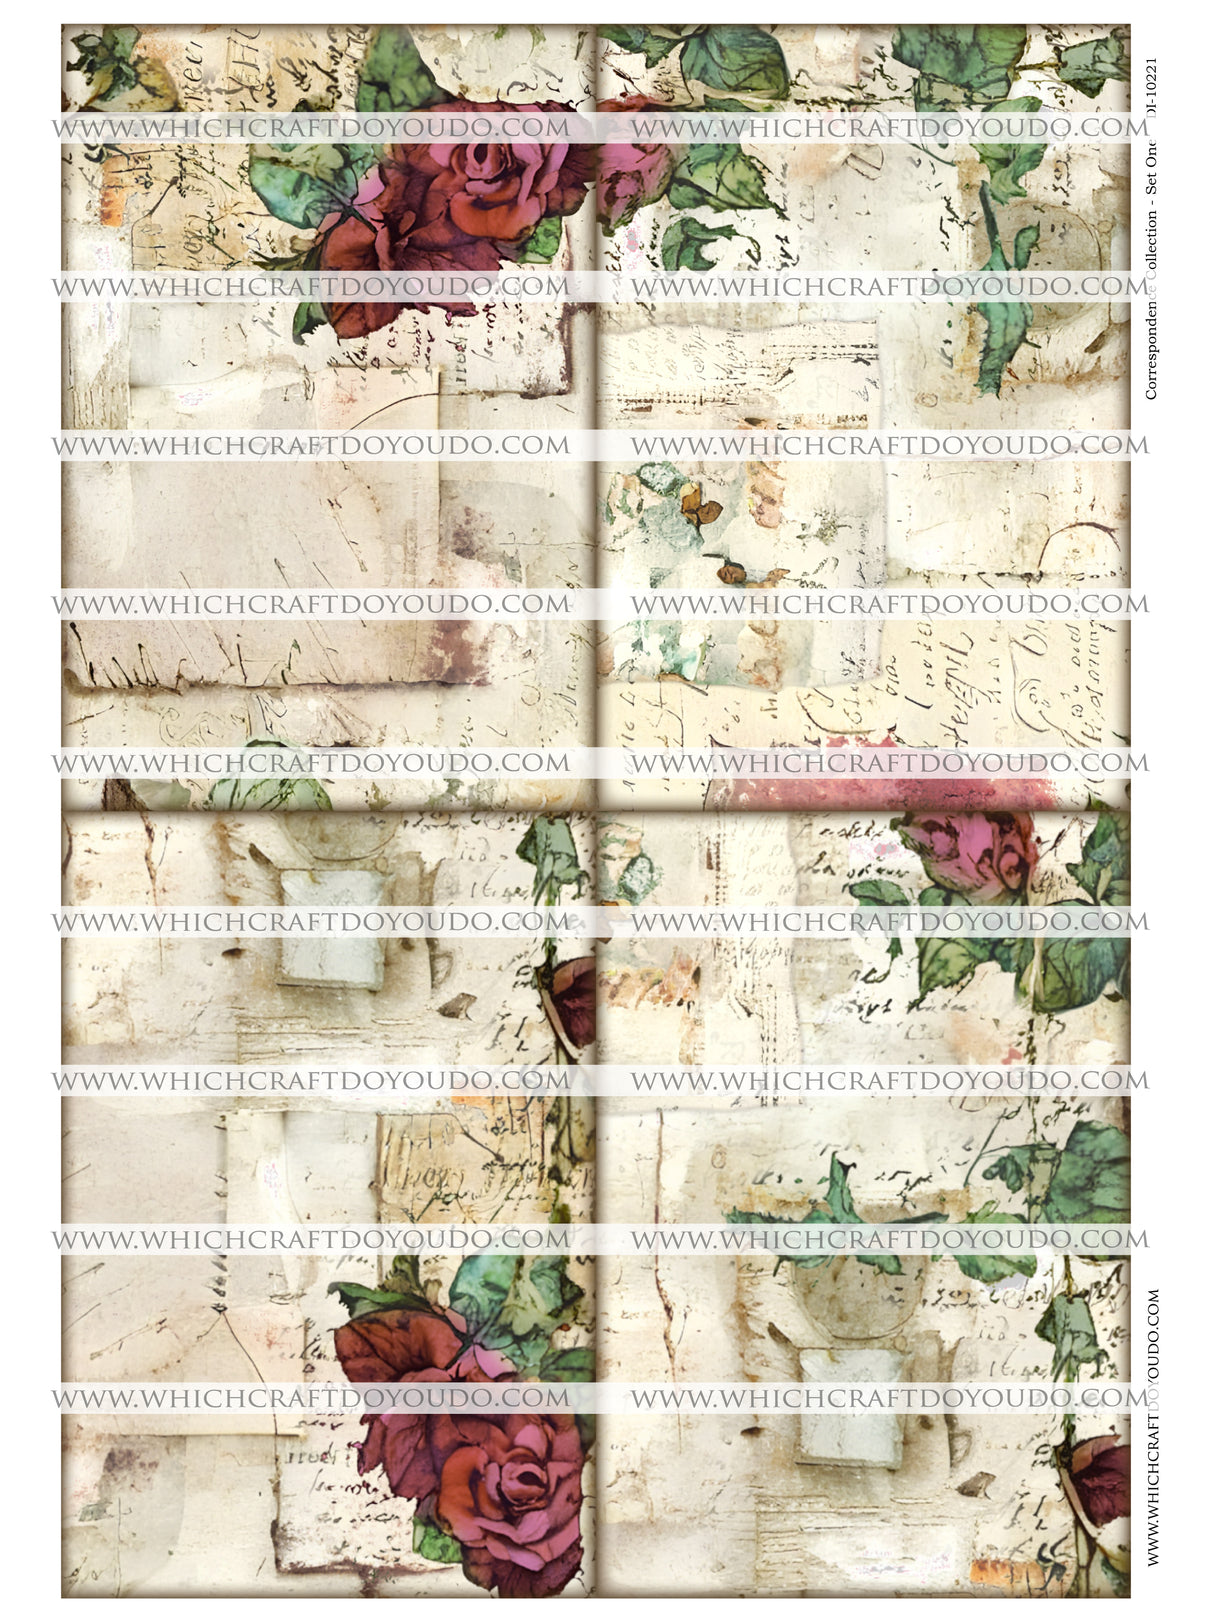 Correspondence Collection - Set One - DI-10221 - Digital Download